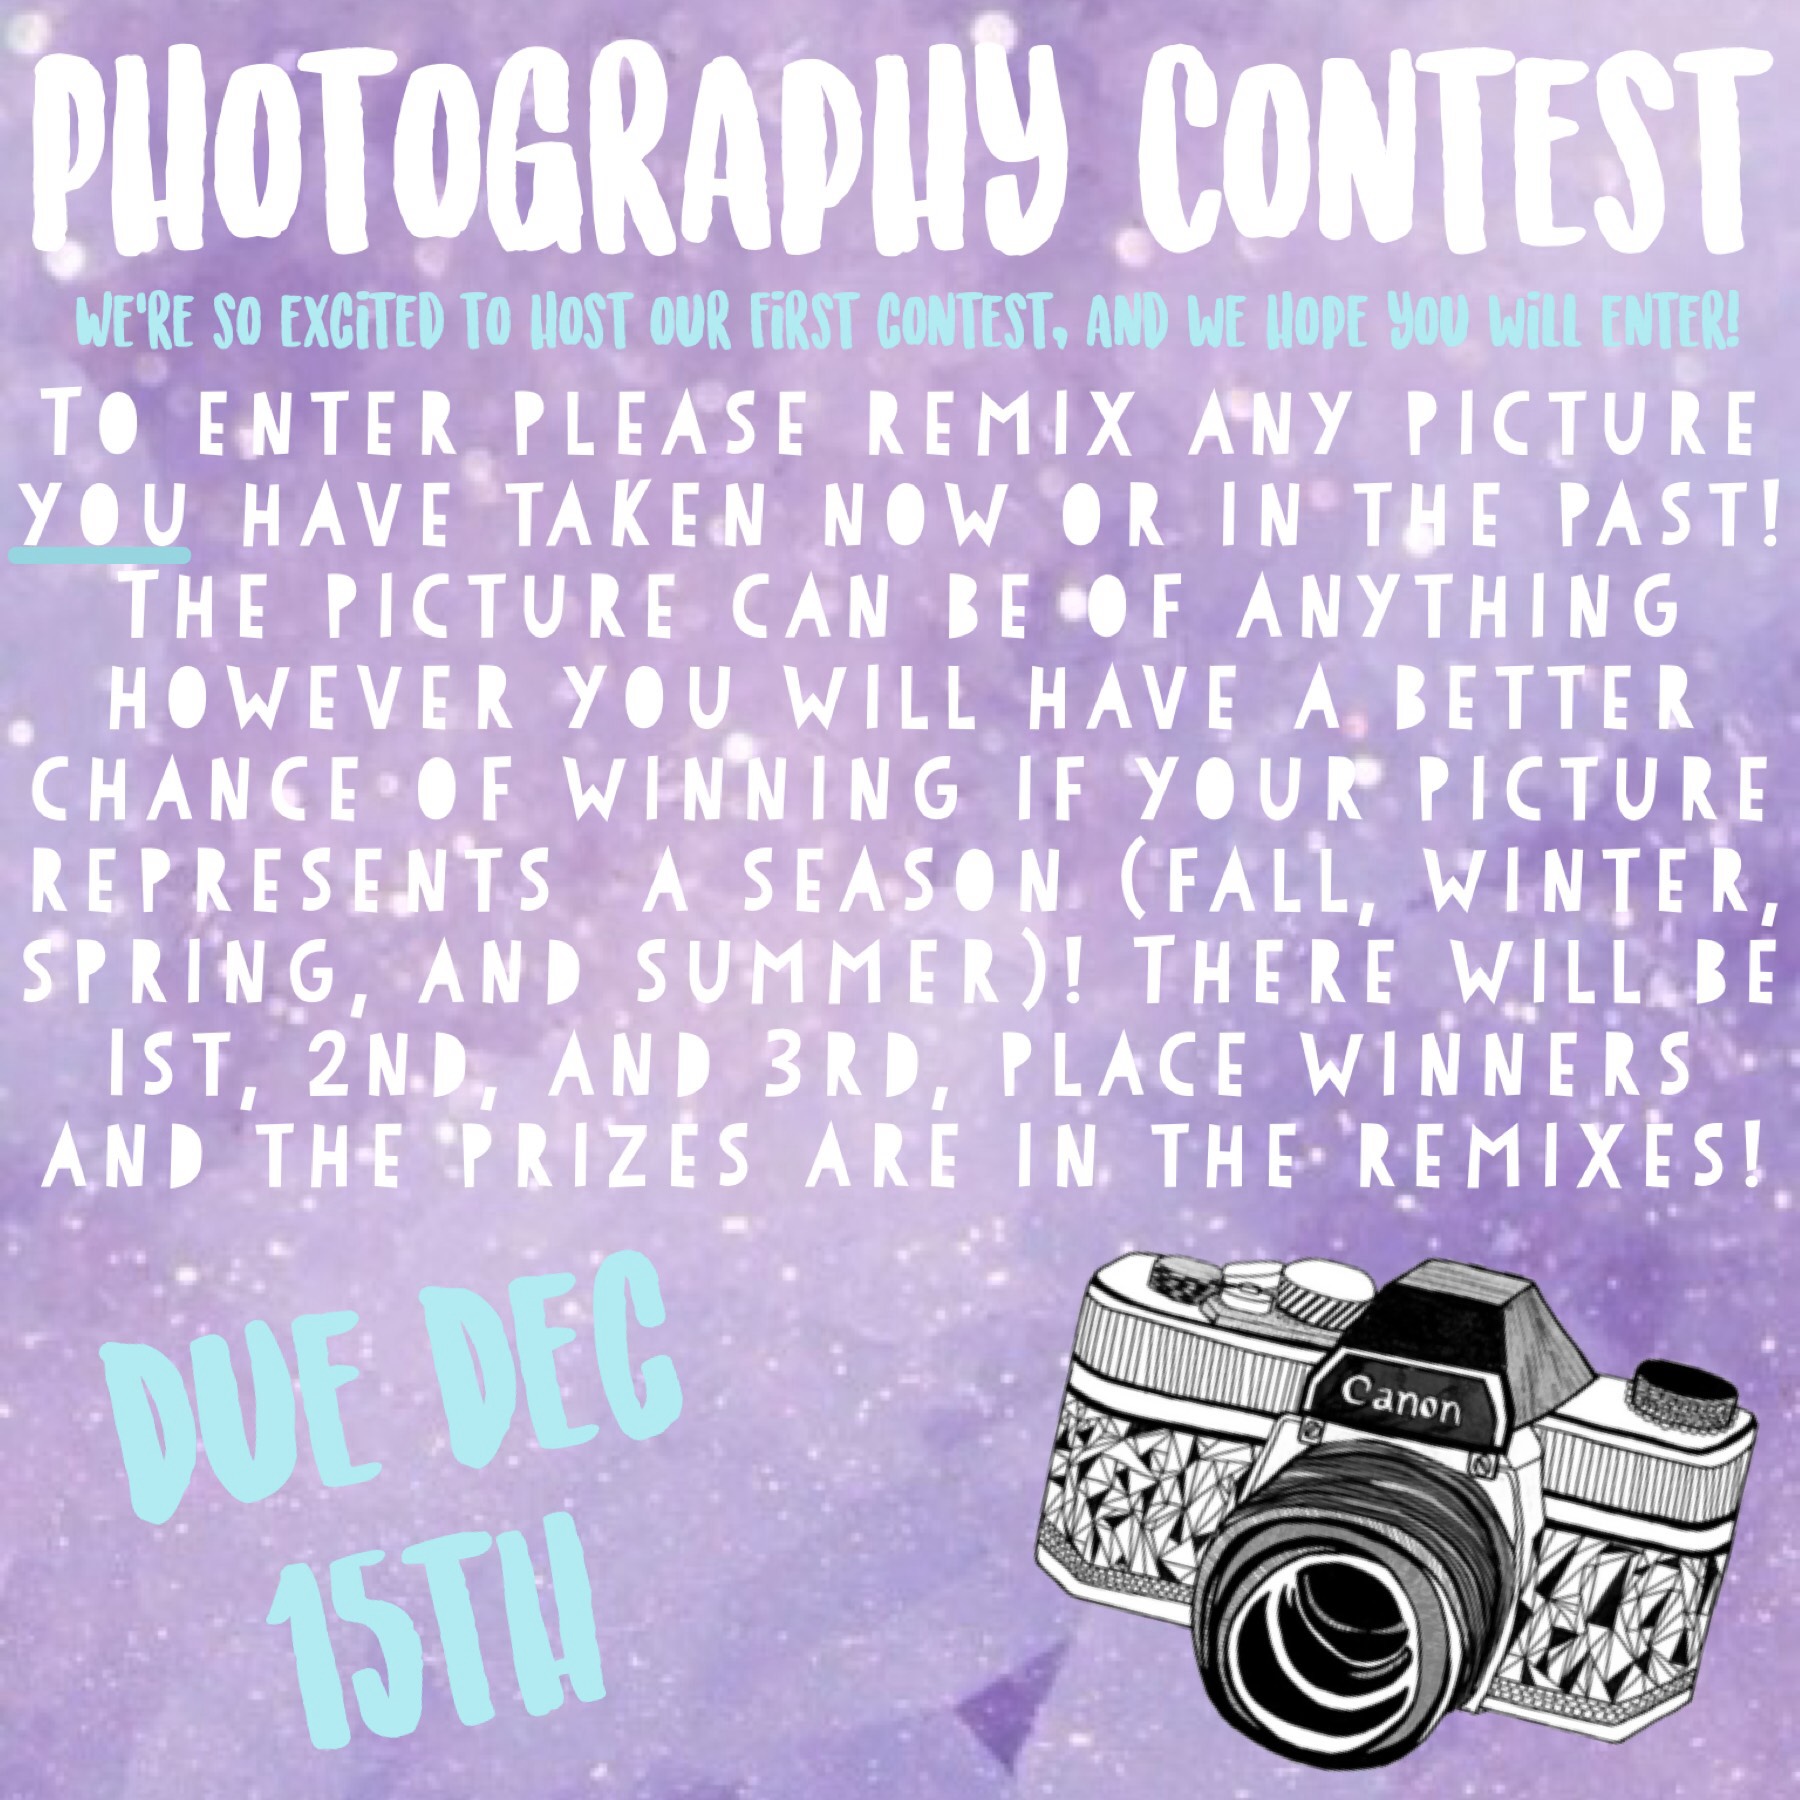 Photography Contest! Due Dec 15th! Ask questions in comments! 💕